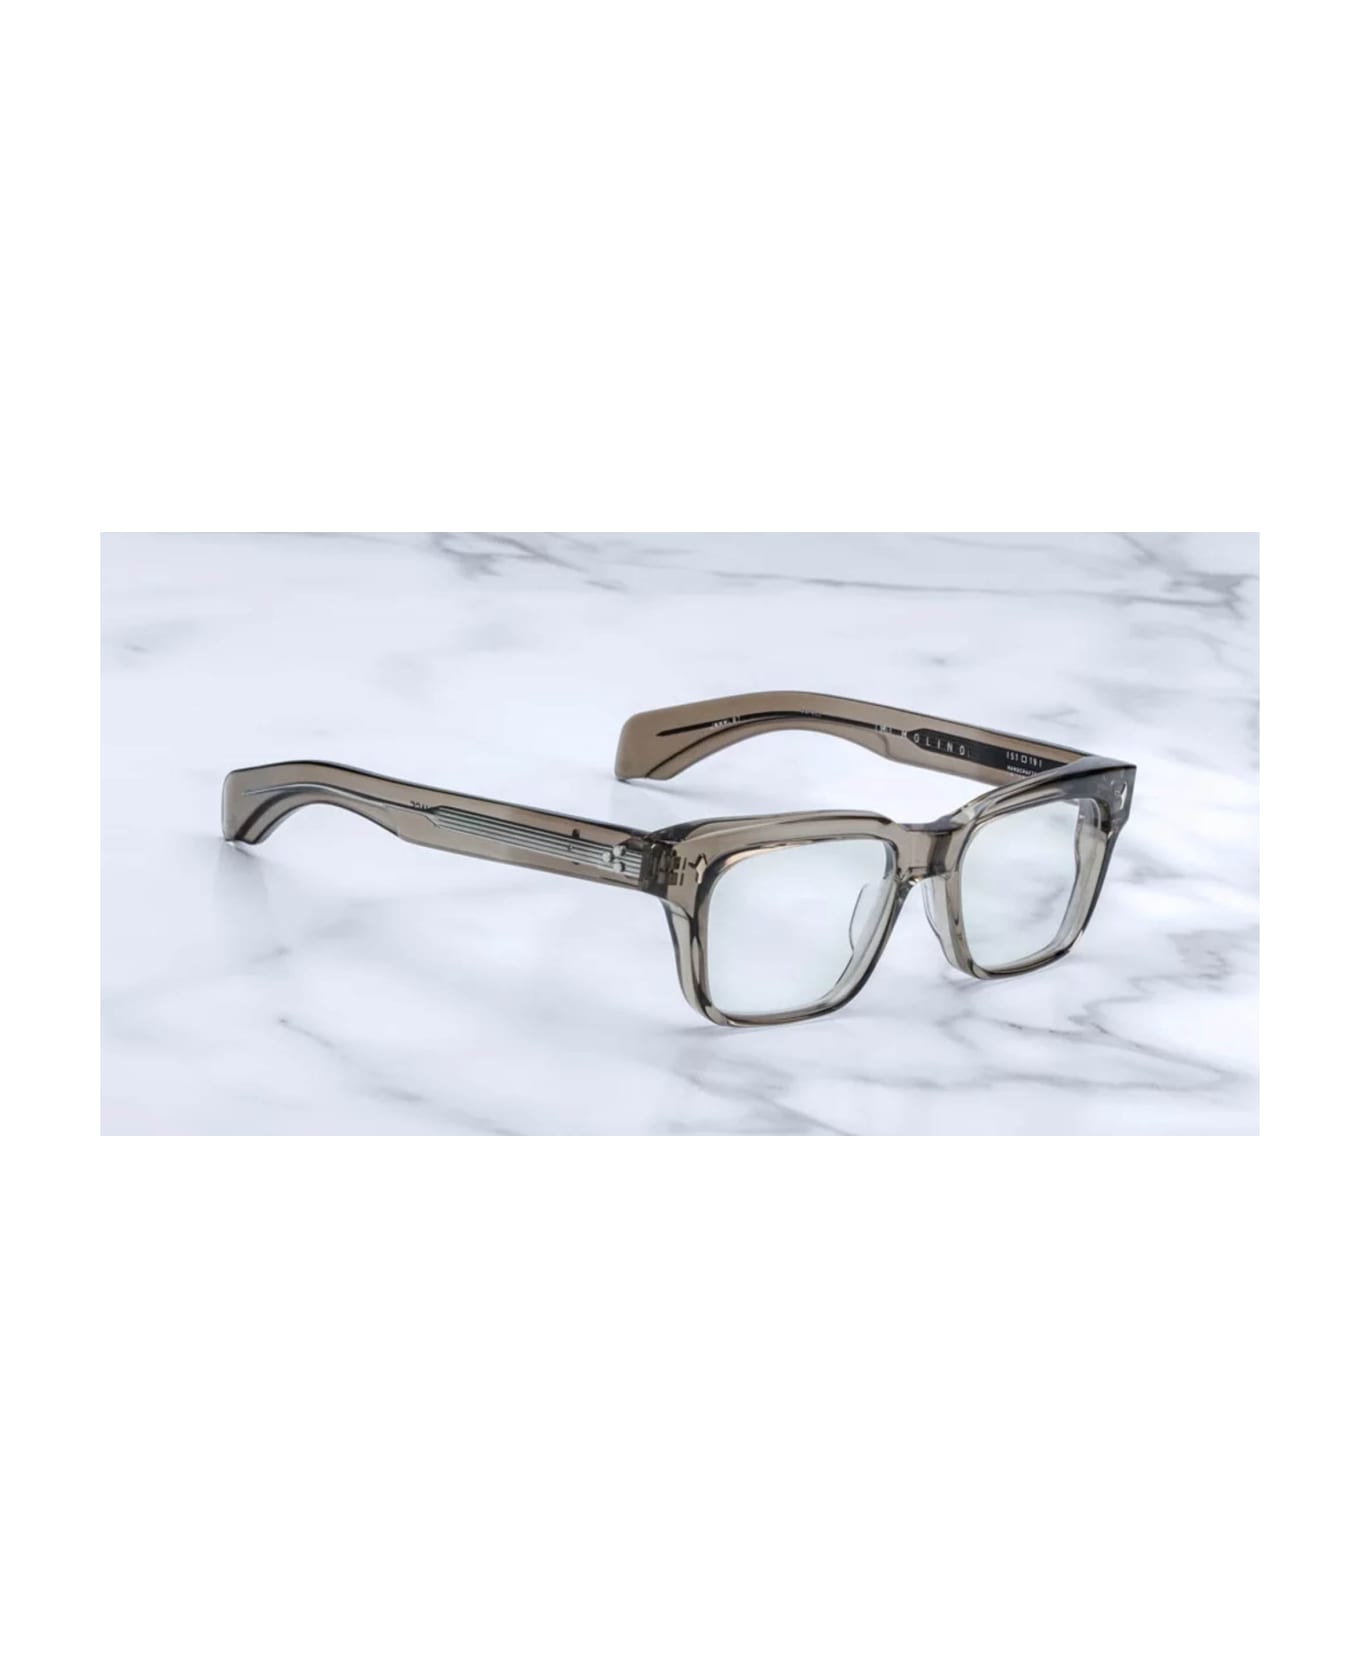 Jacques Marie Mage Molino - Taupe Glasses - taupe アイウェア